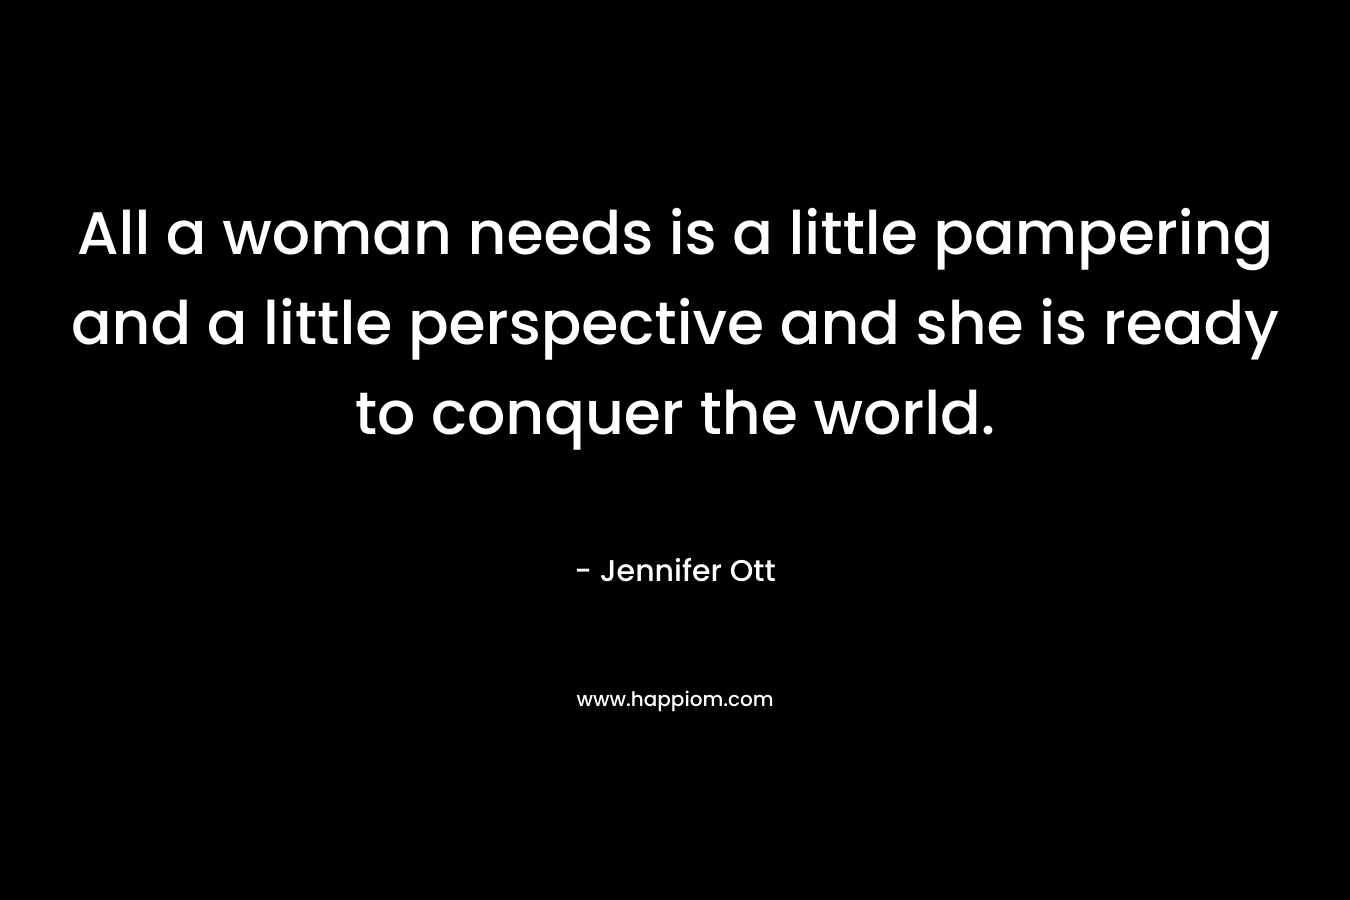 All a woman needs is a little pampering and a little perspective and she is ready to conquer the world.